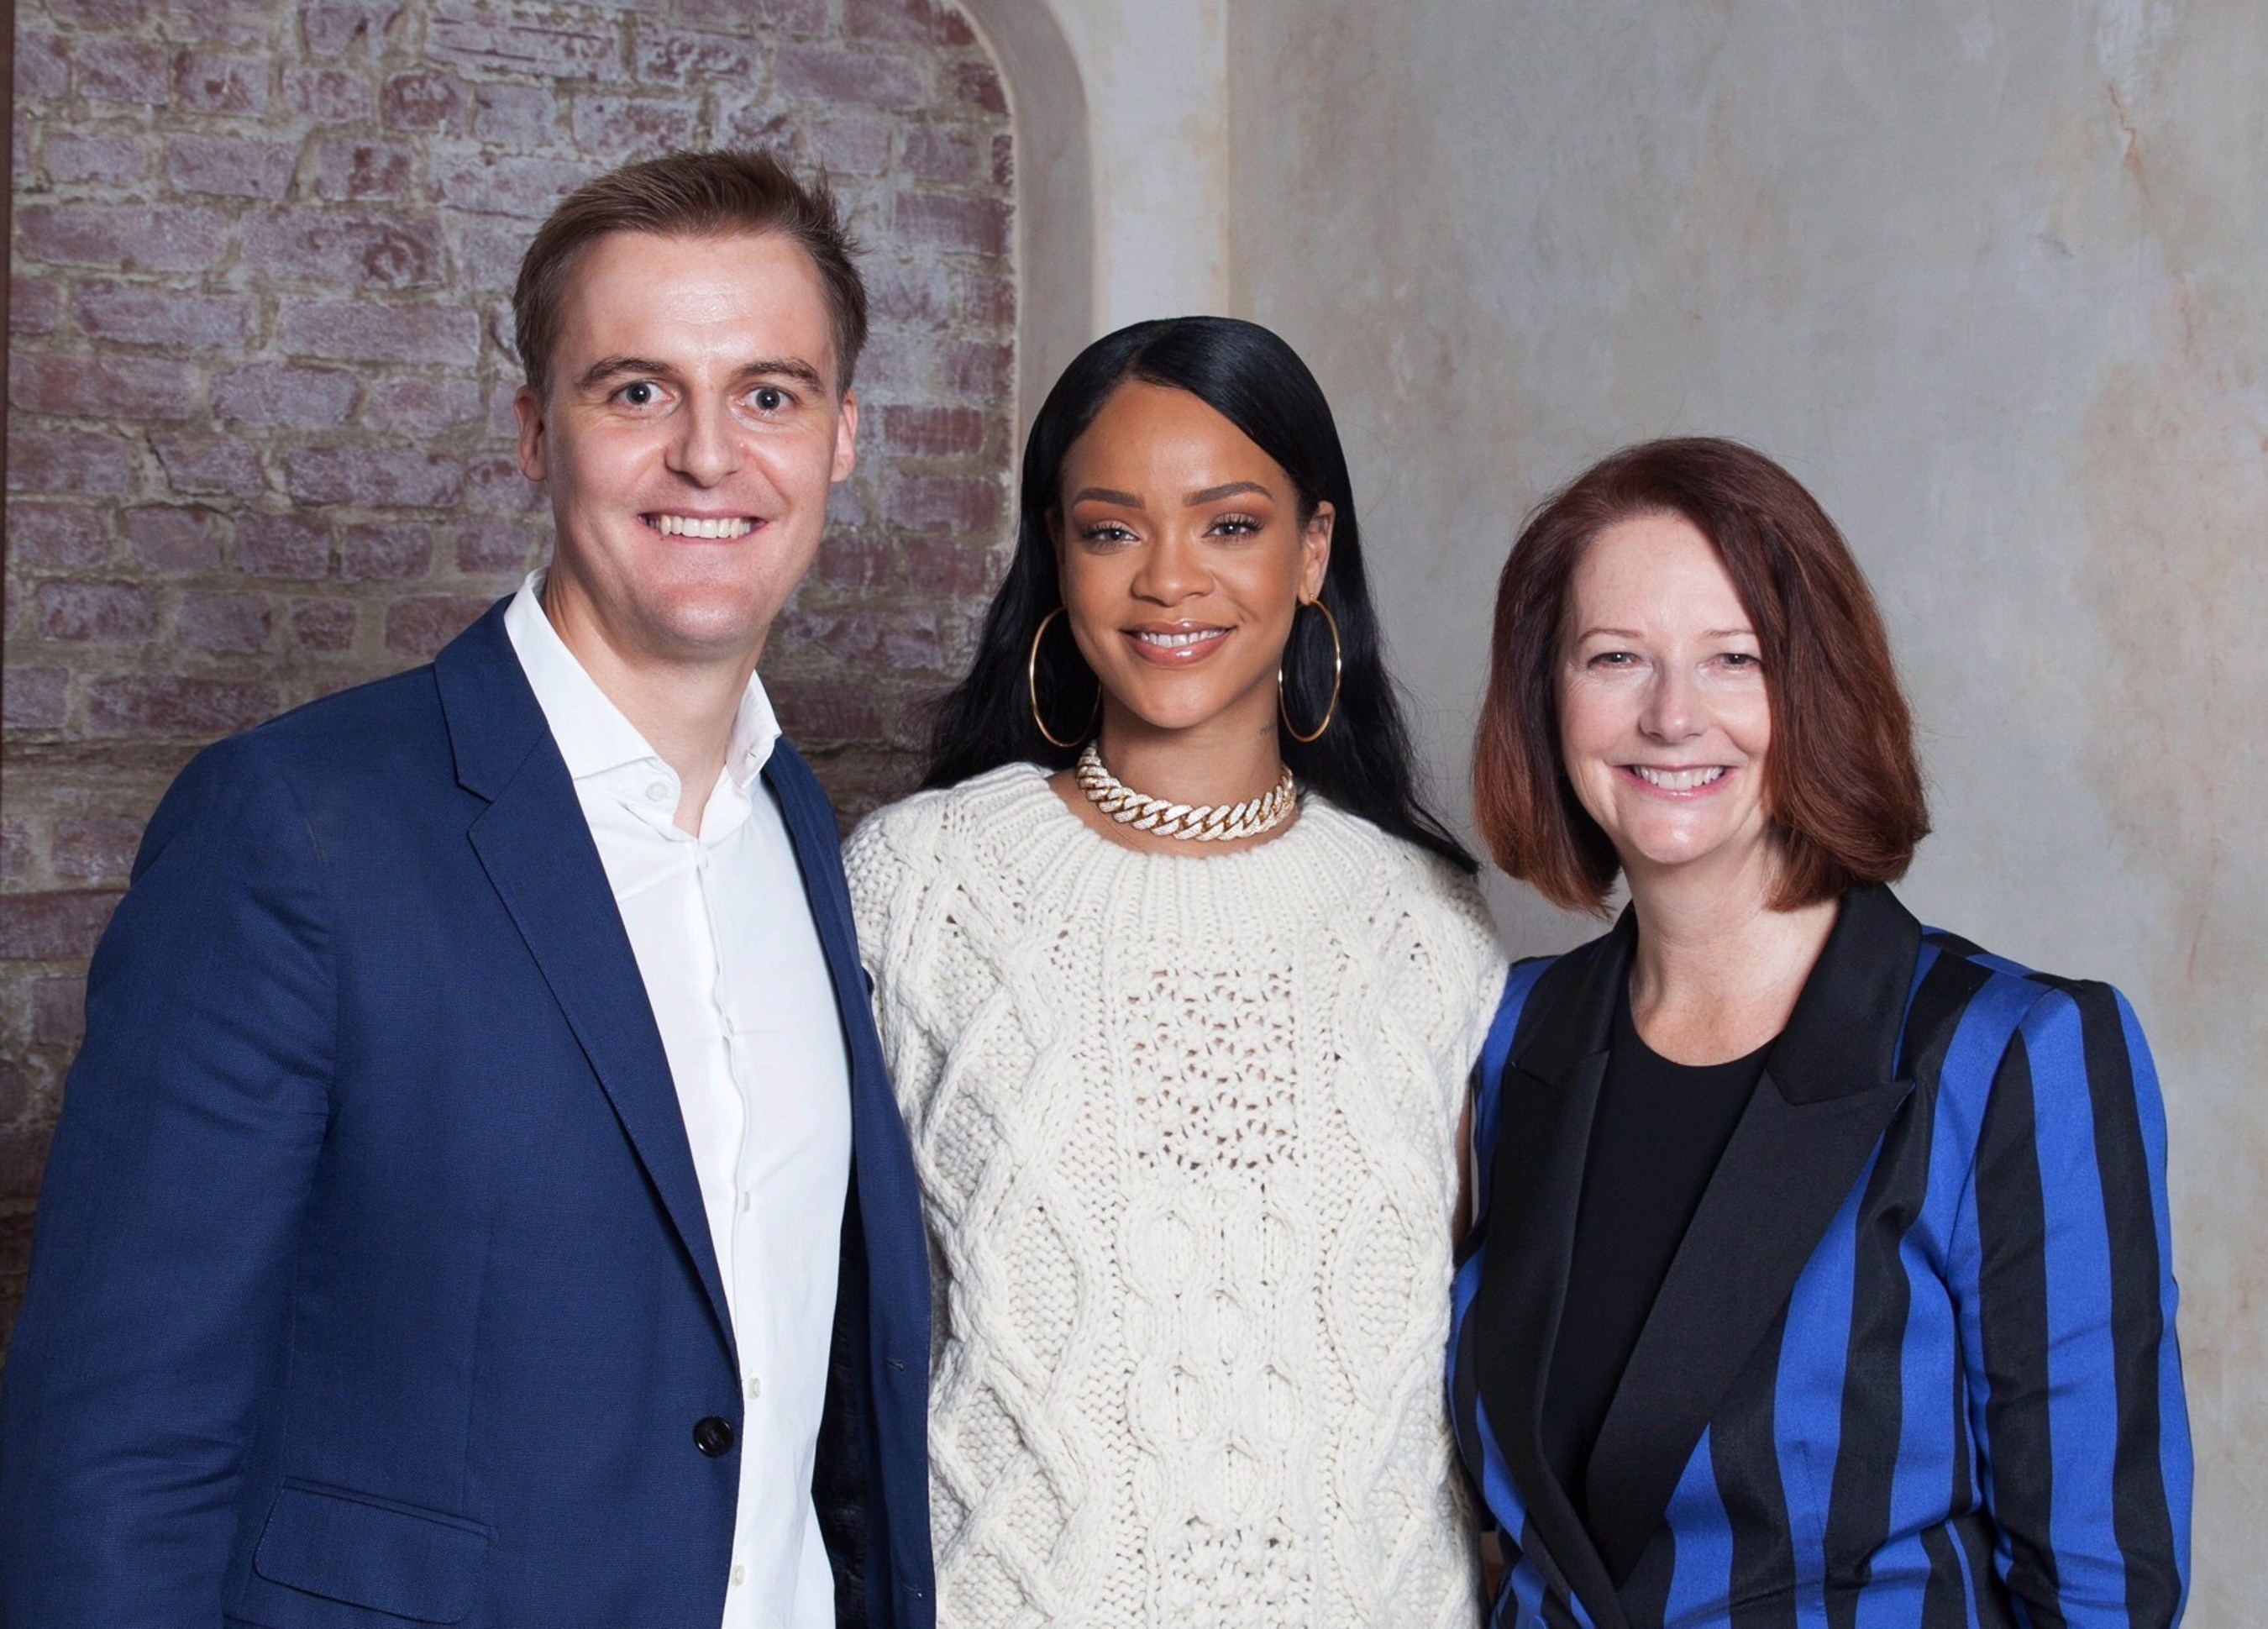 Hugh Evans, CEO of Global Citizen, with Rihanna and Global Partnership for Education (GPE) Chair and former Prime Minister of Australia, Julia Gillard, announce partnership with Rihanna's Clara Lionel Foundation where she will serve as the Global Ambassador for Education.